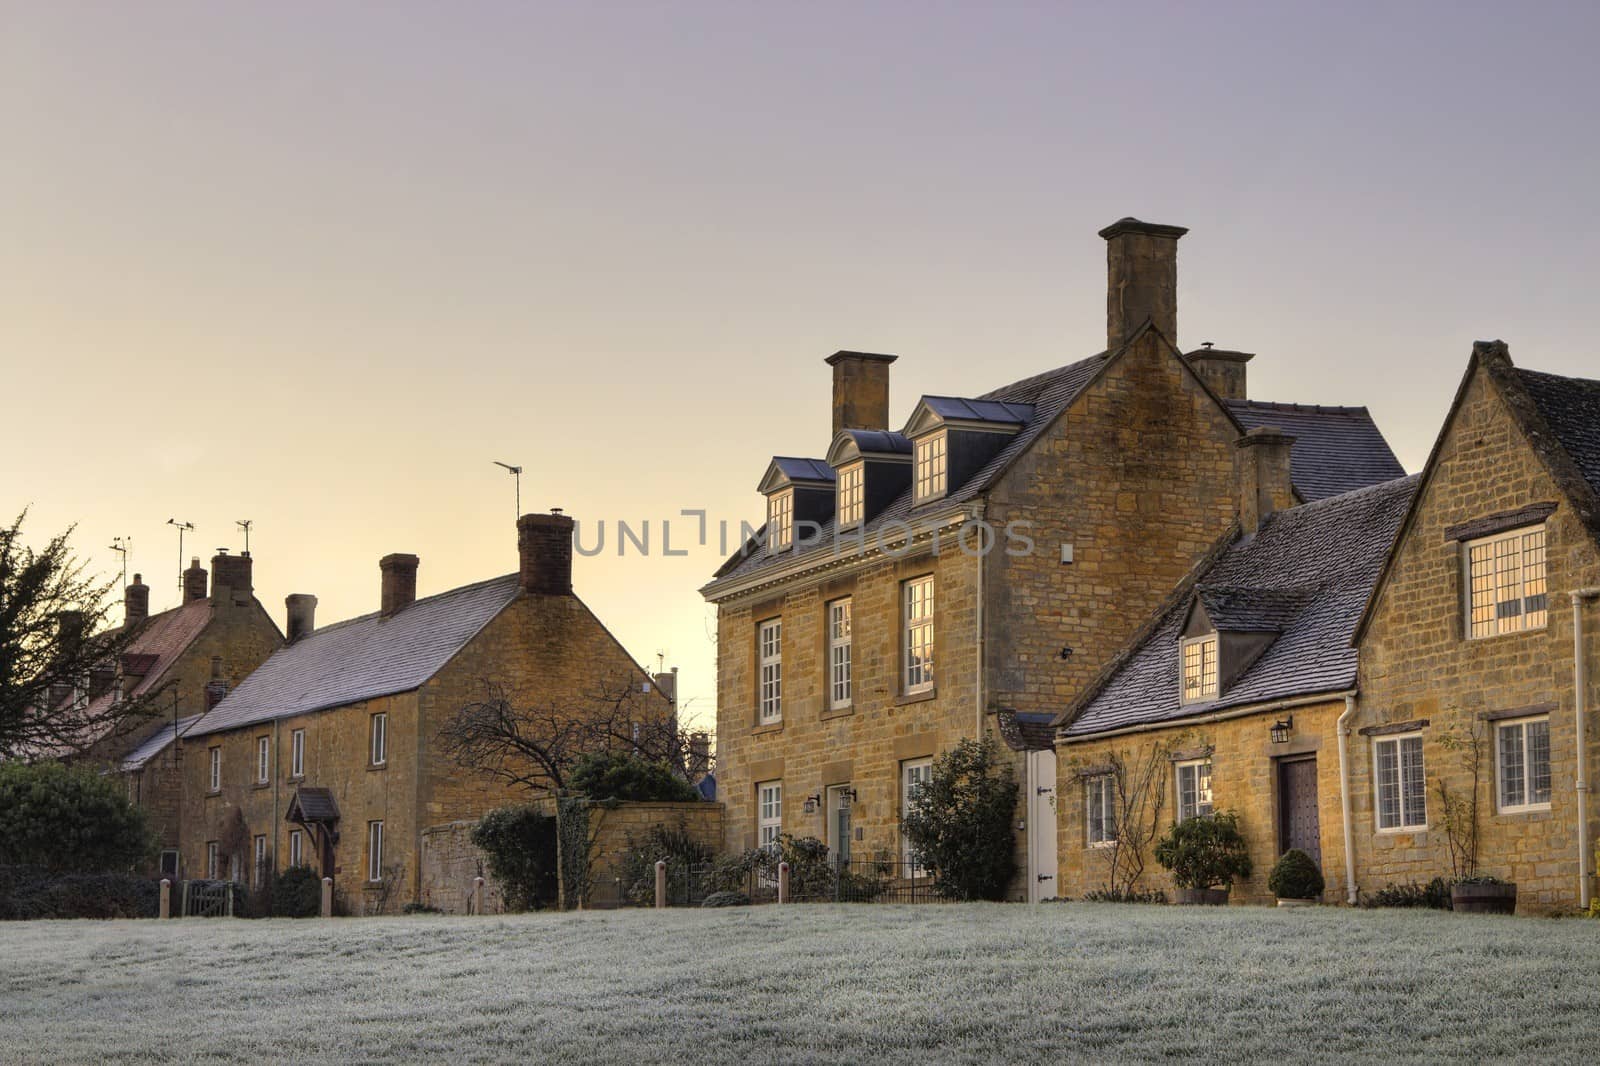 Row of Cotswold houses by andrewroland